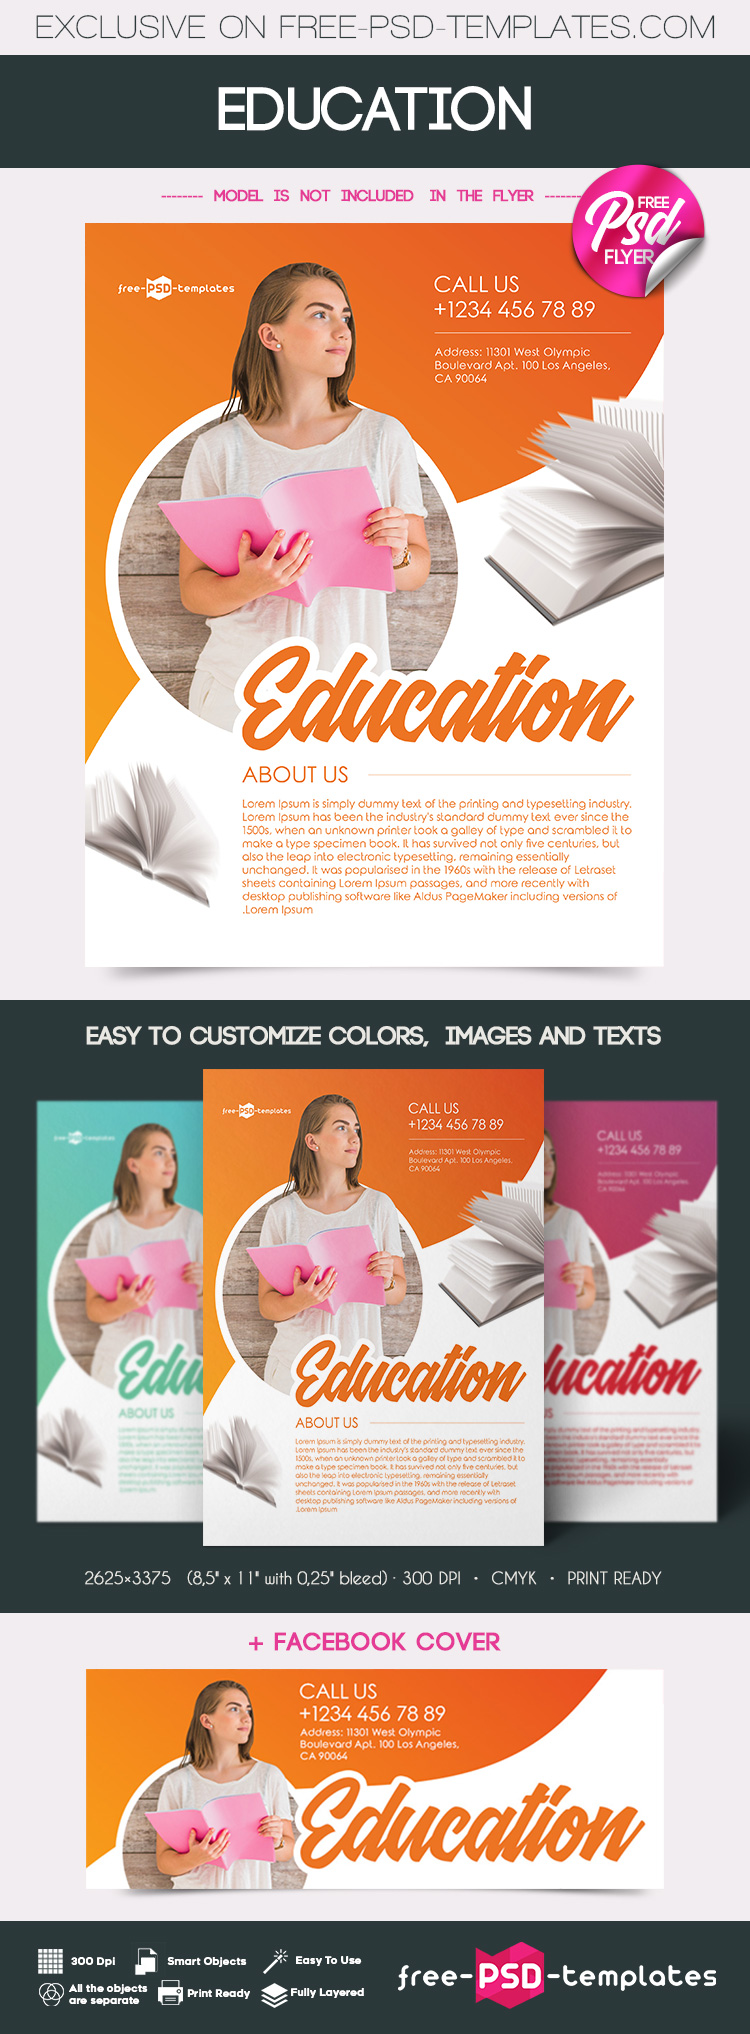 Free Education Flyer in PSD  Free PSD Templates Within Simple Flyer Template Psd